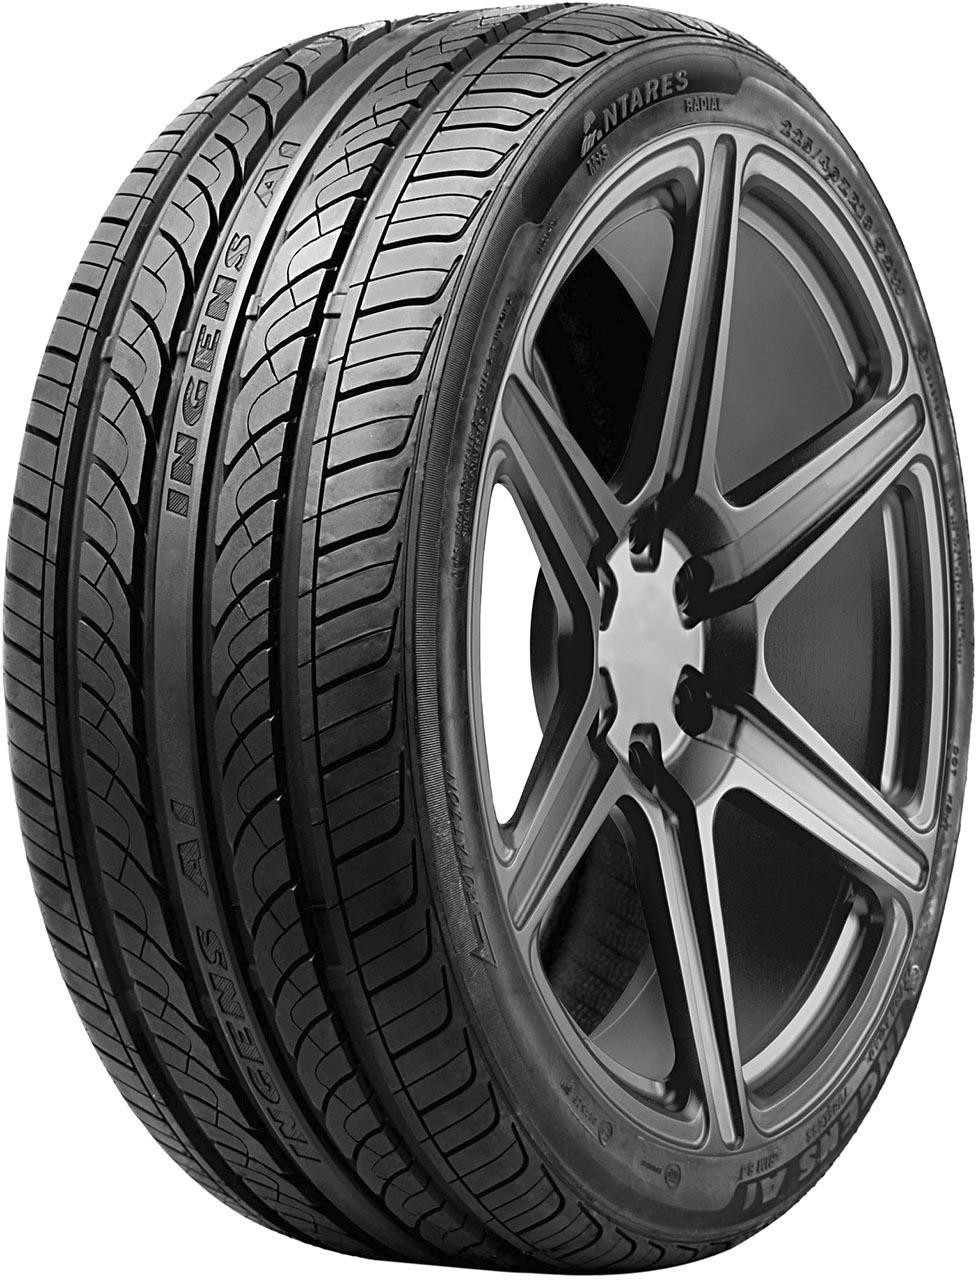 Antares Tires Ingens A1 265/30 R19 93W XL